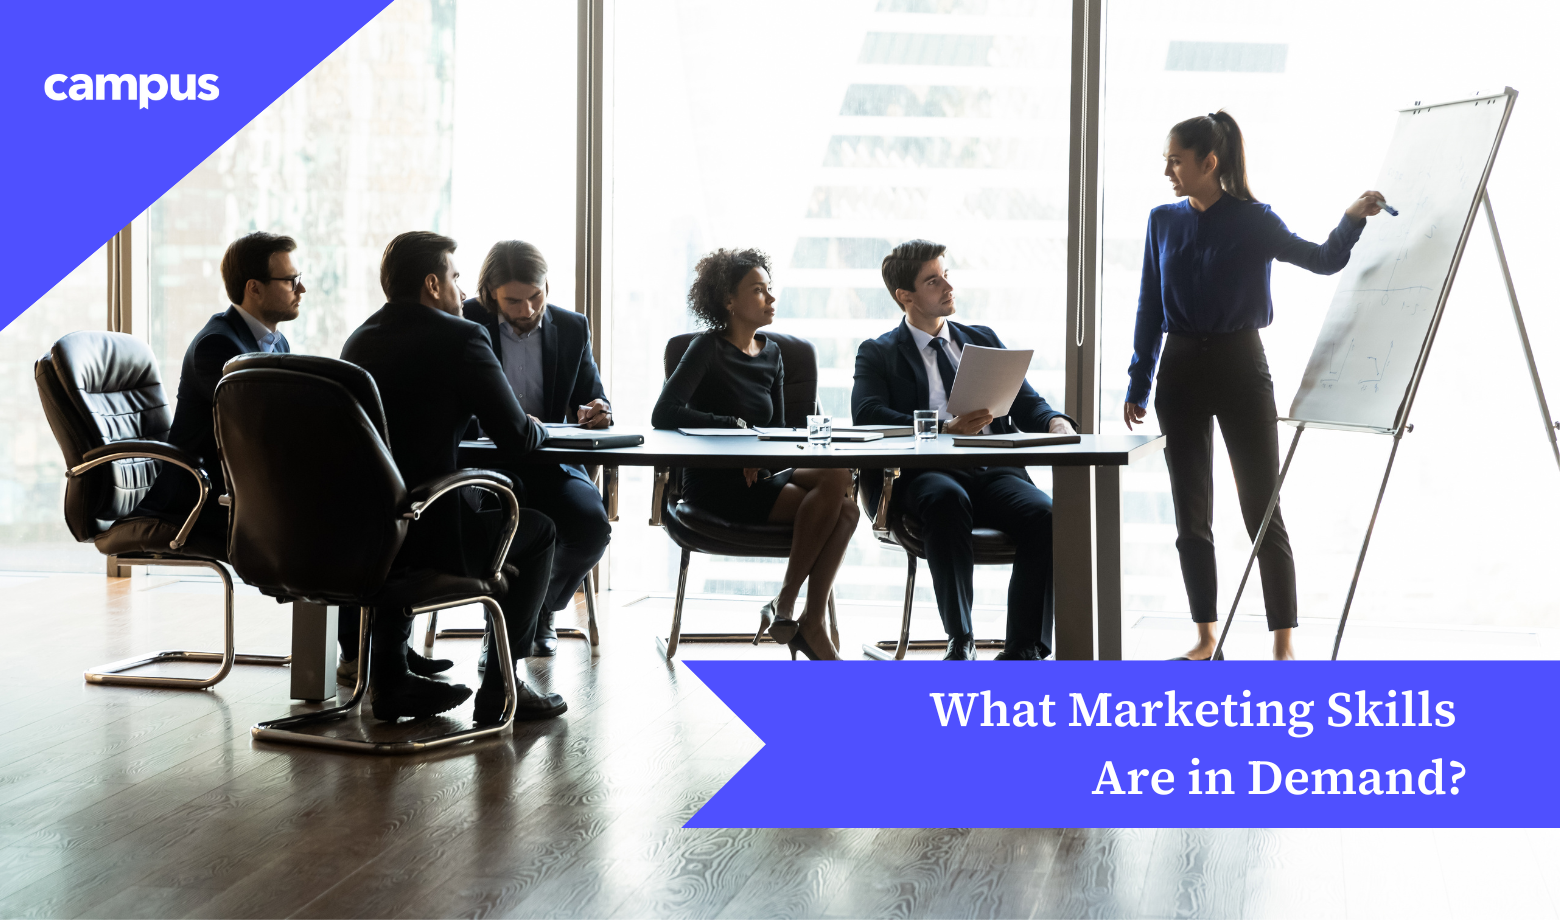 What Marketing Skills Are in Demand?